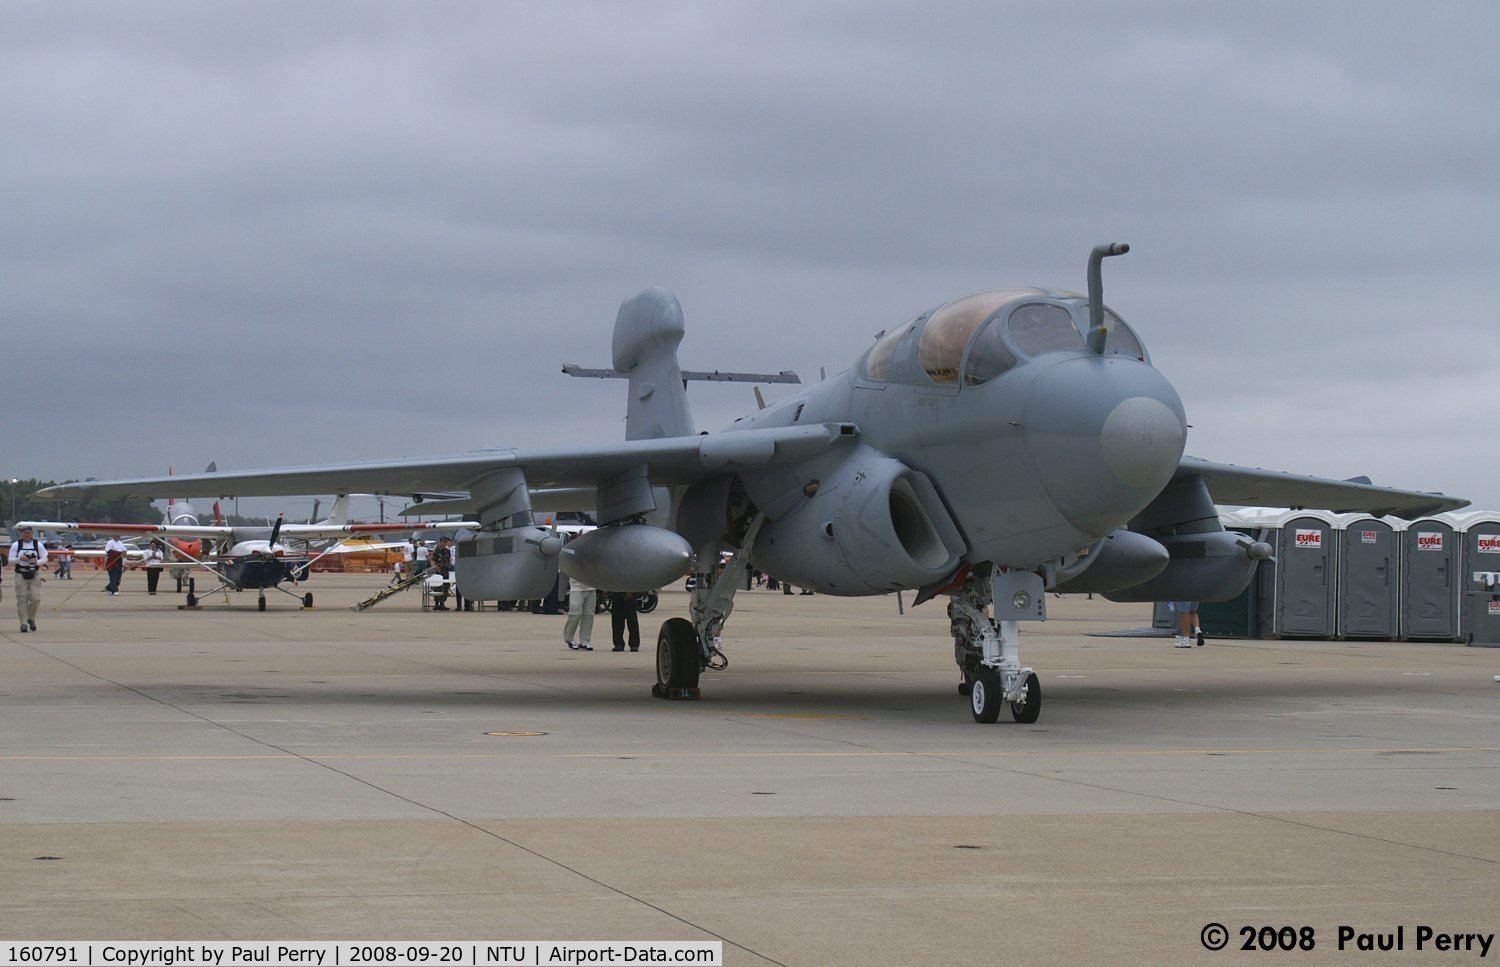 160791, Grumman EA-6B Prowler C/N P-78, The Buick...good to see her out and about still...while we still can.